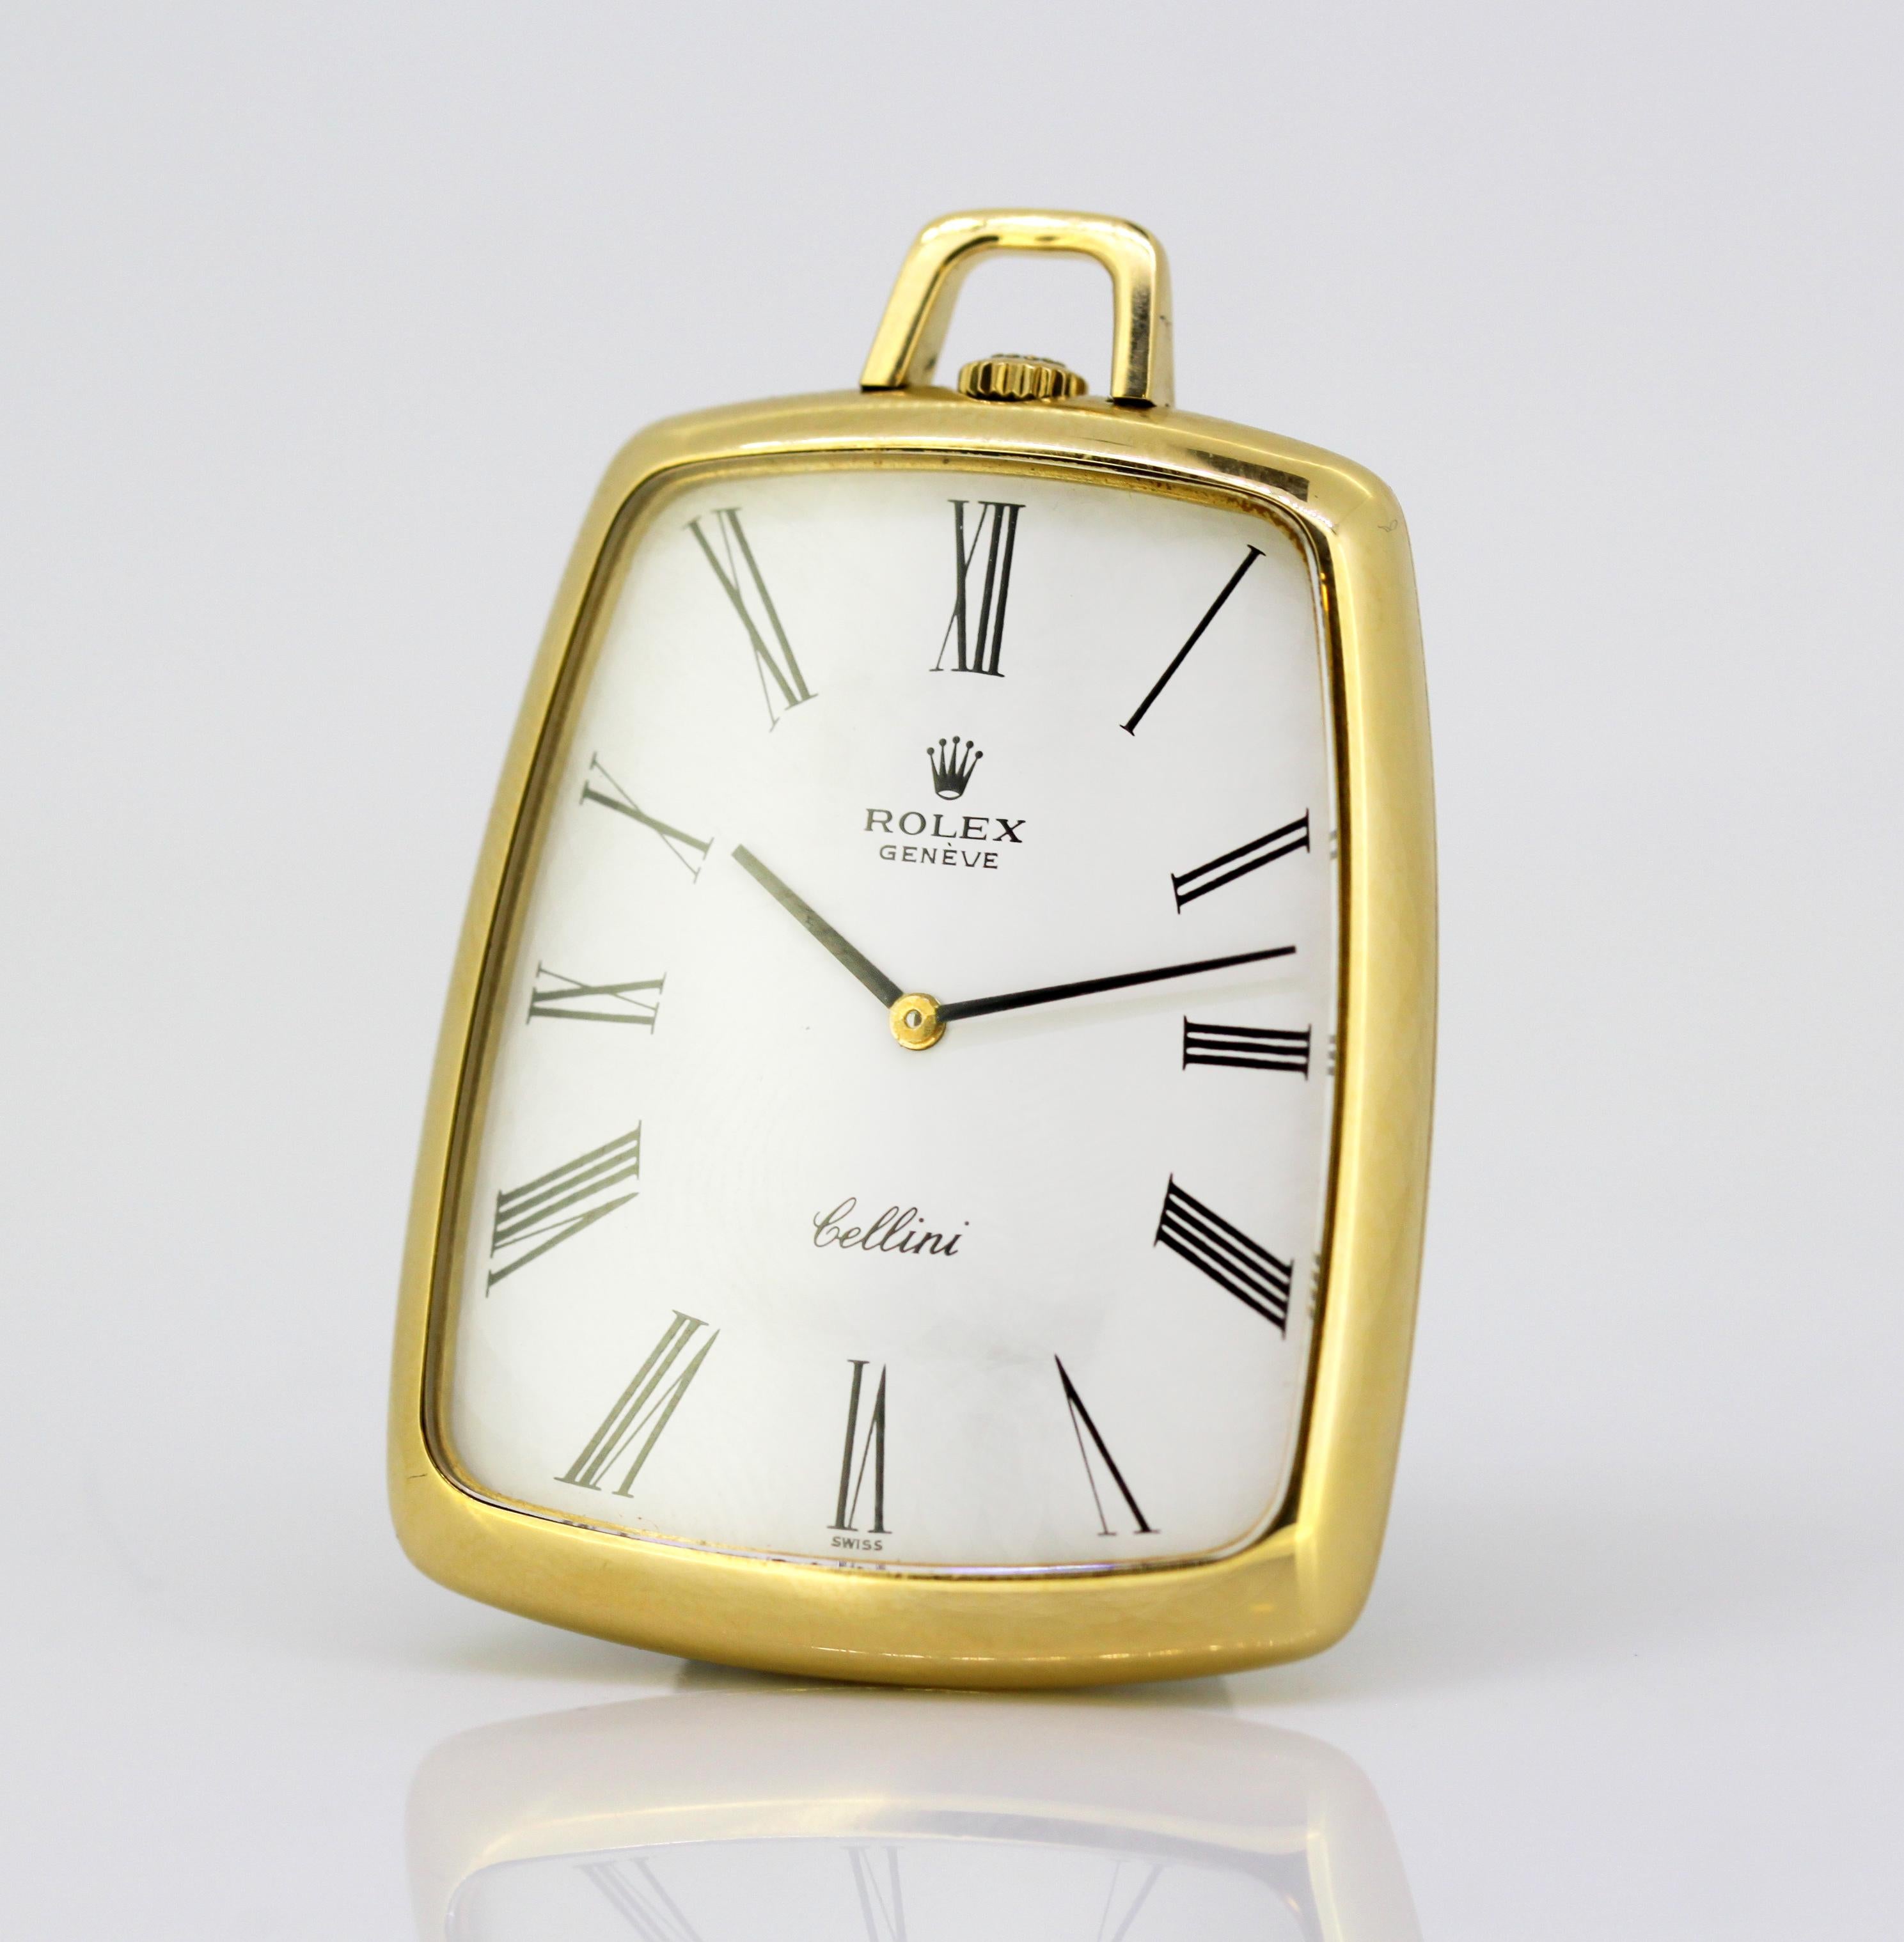 Rolex Cellini 18K Gold Pocket Watch
Made in Switzerland Circa 1970's
Fully hallmarked
Pocket Watch Ref : 3727

Movement: Mechanical
Display type : Analogue
Dial : White ( See Photos )
Casing Material : 18K Gold
Hands : Black

Dimensions - 
Size :